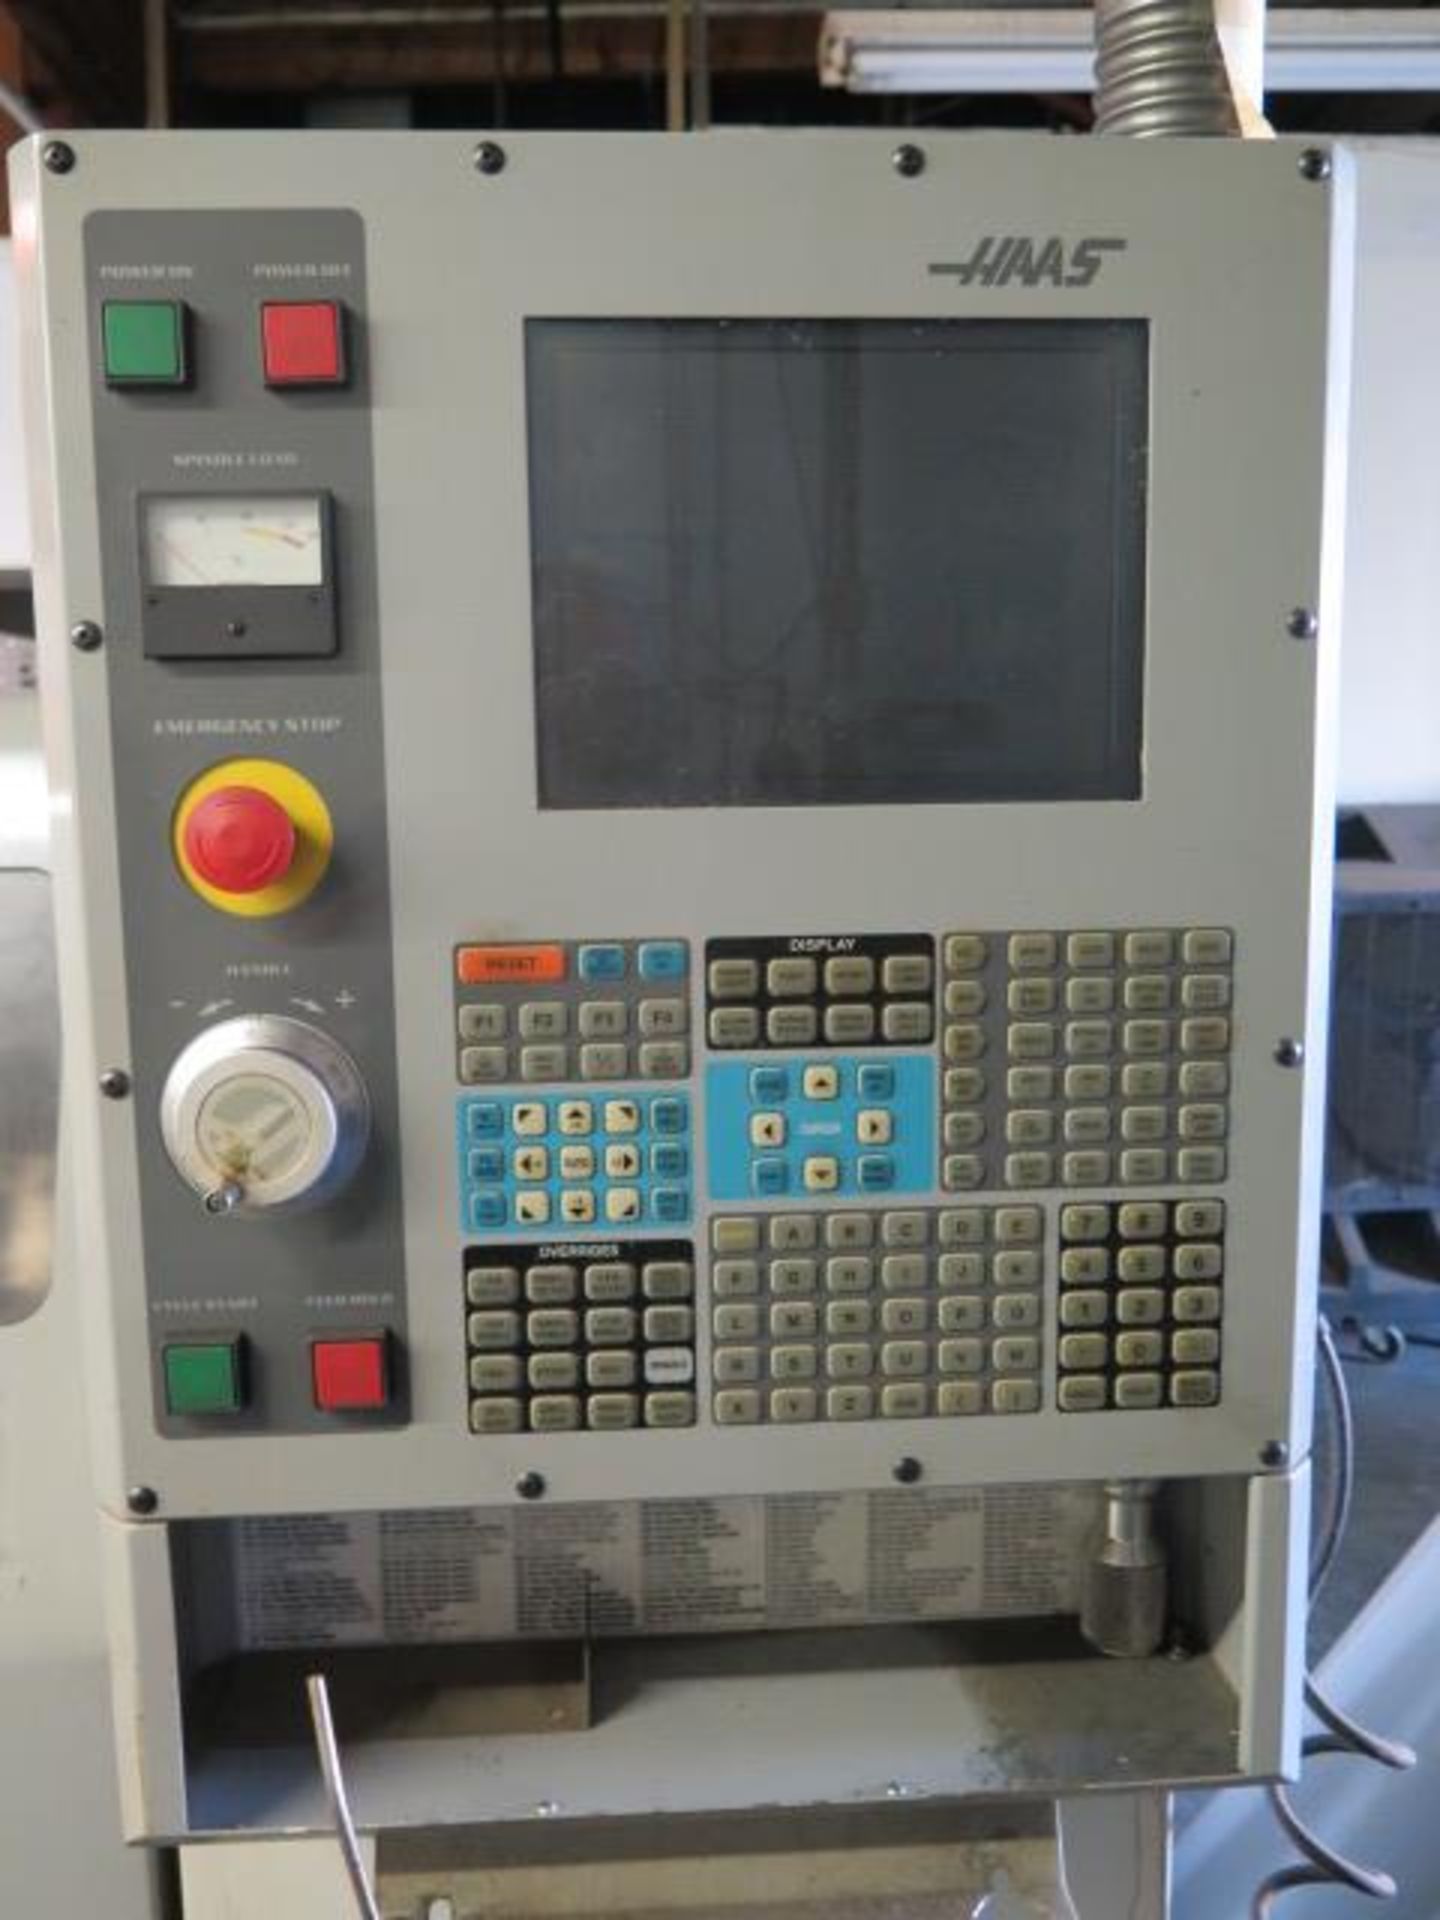 2004 Haas SL-10 CNC Turning Center s/n 68182, Tool Presetter, 12-Station Turret, SOLD AS IS - Image 5 of 14